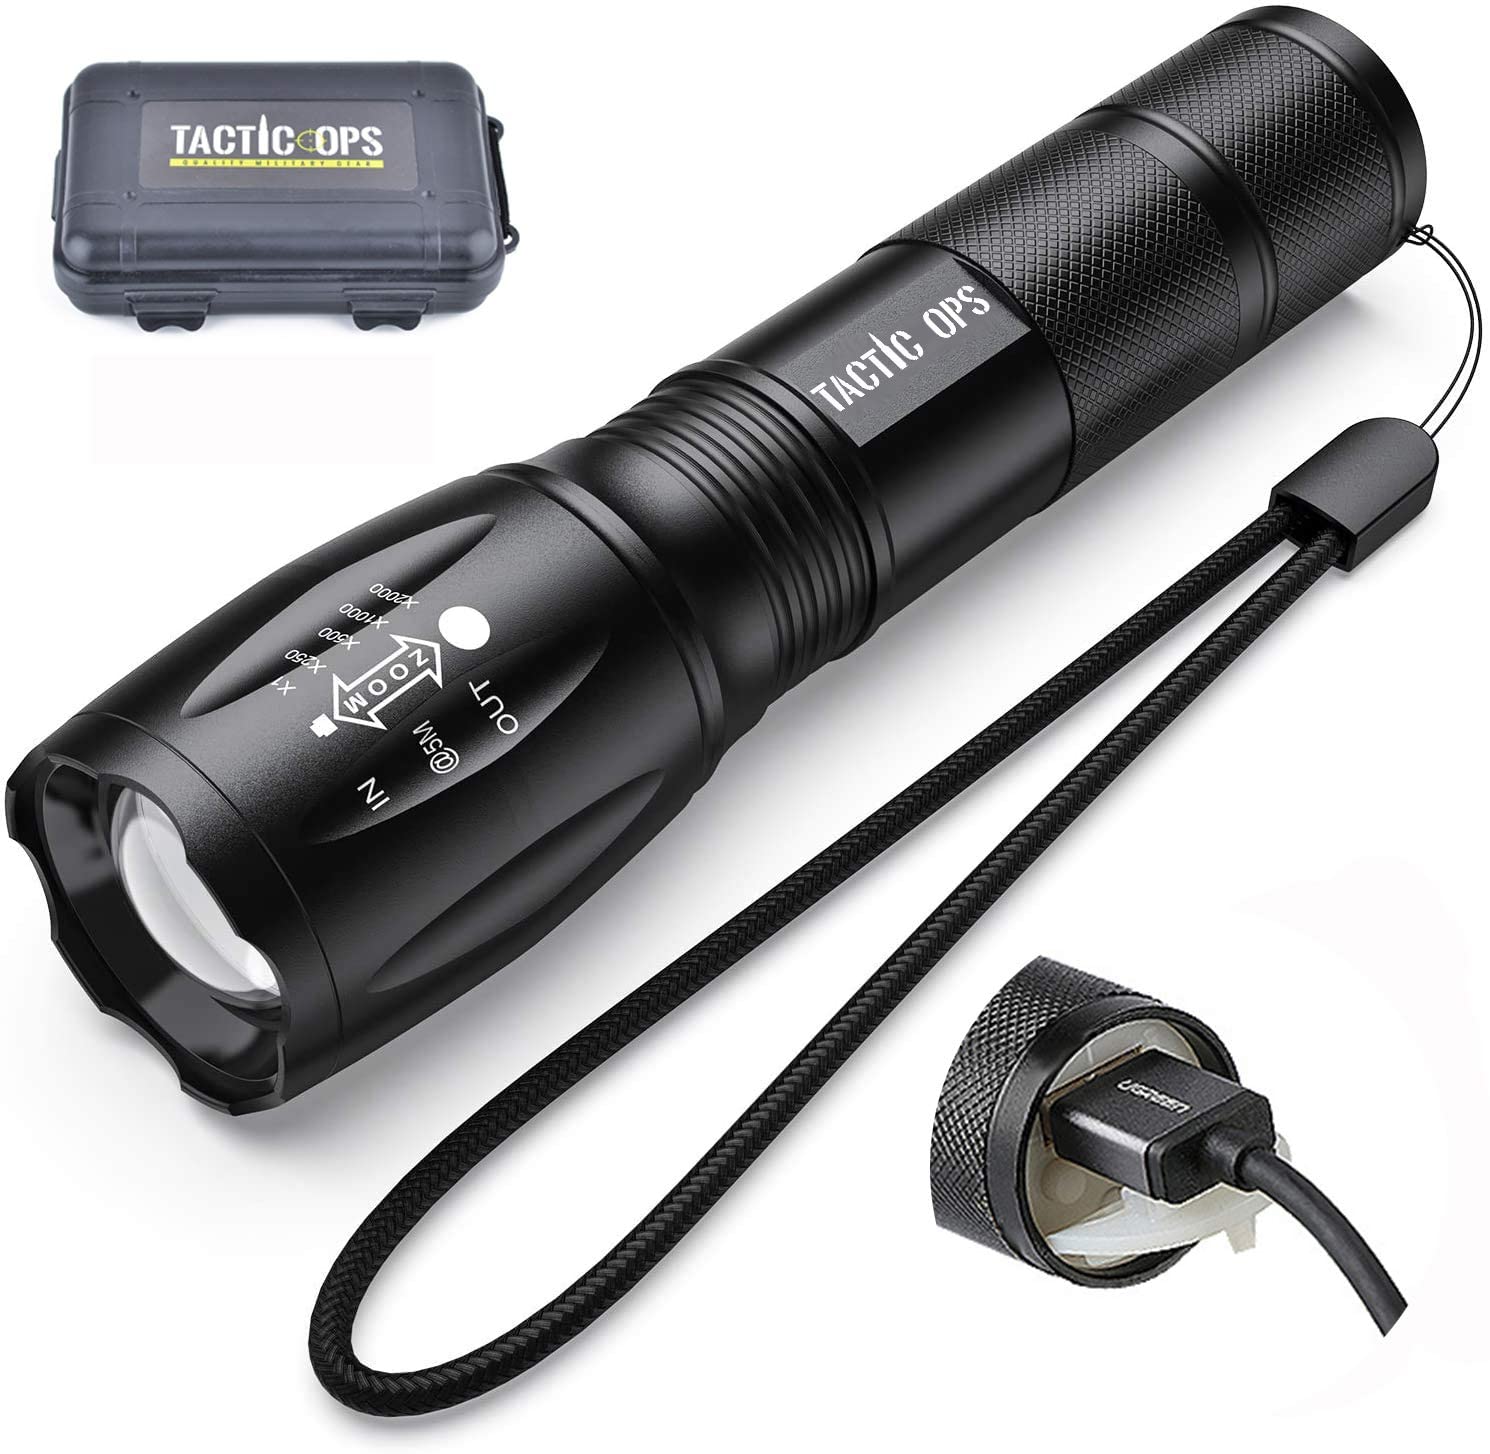 Rechargeable 1200 Lumen LED Flashlight w/ Carrying Case and USB Cable